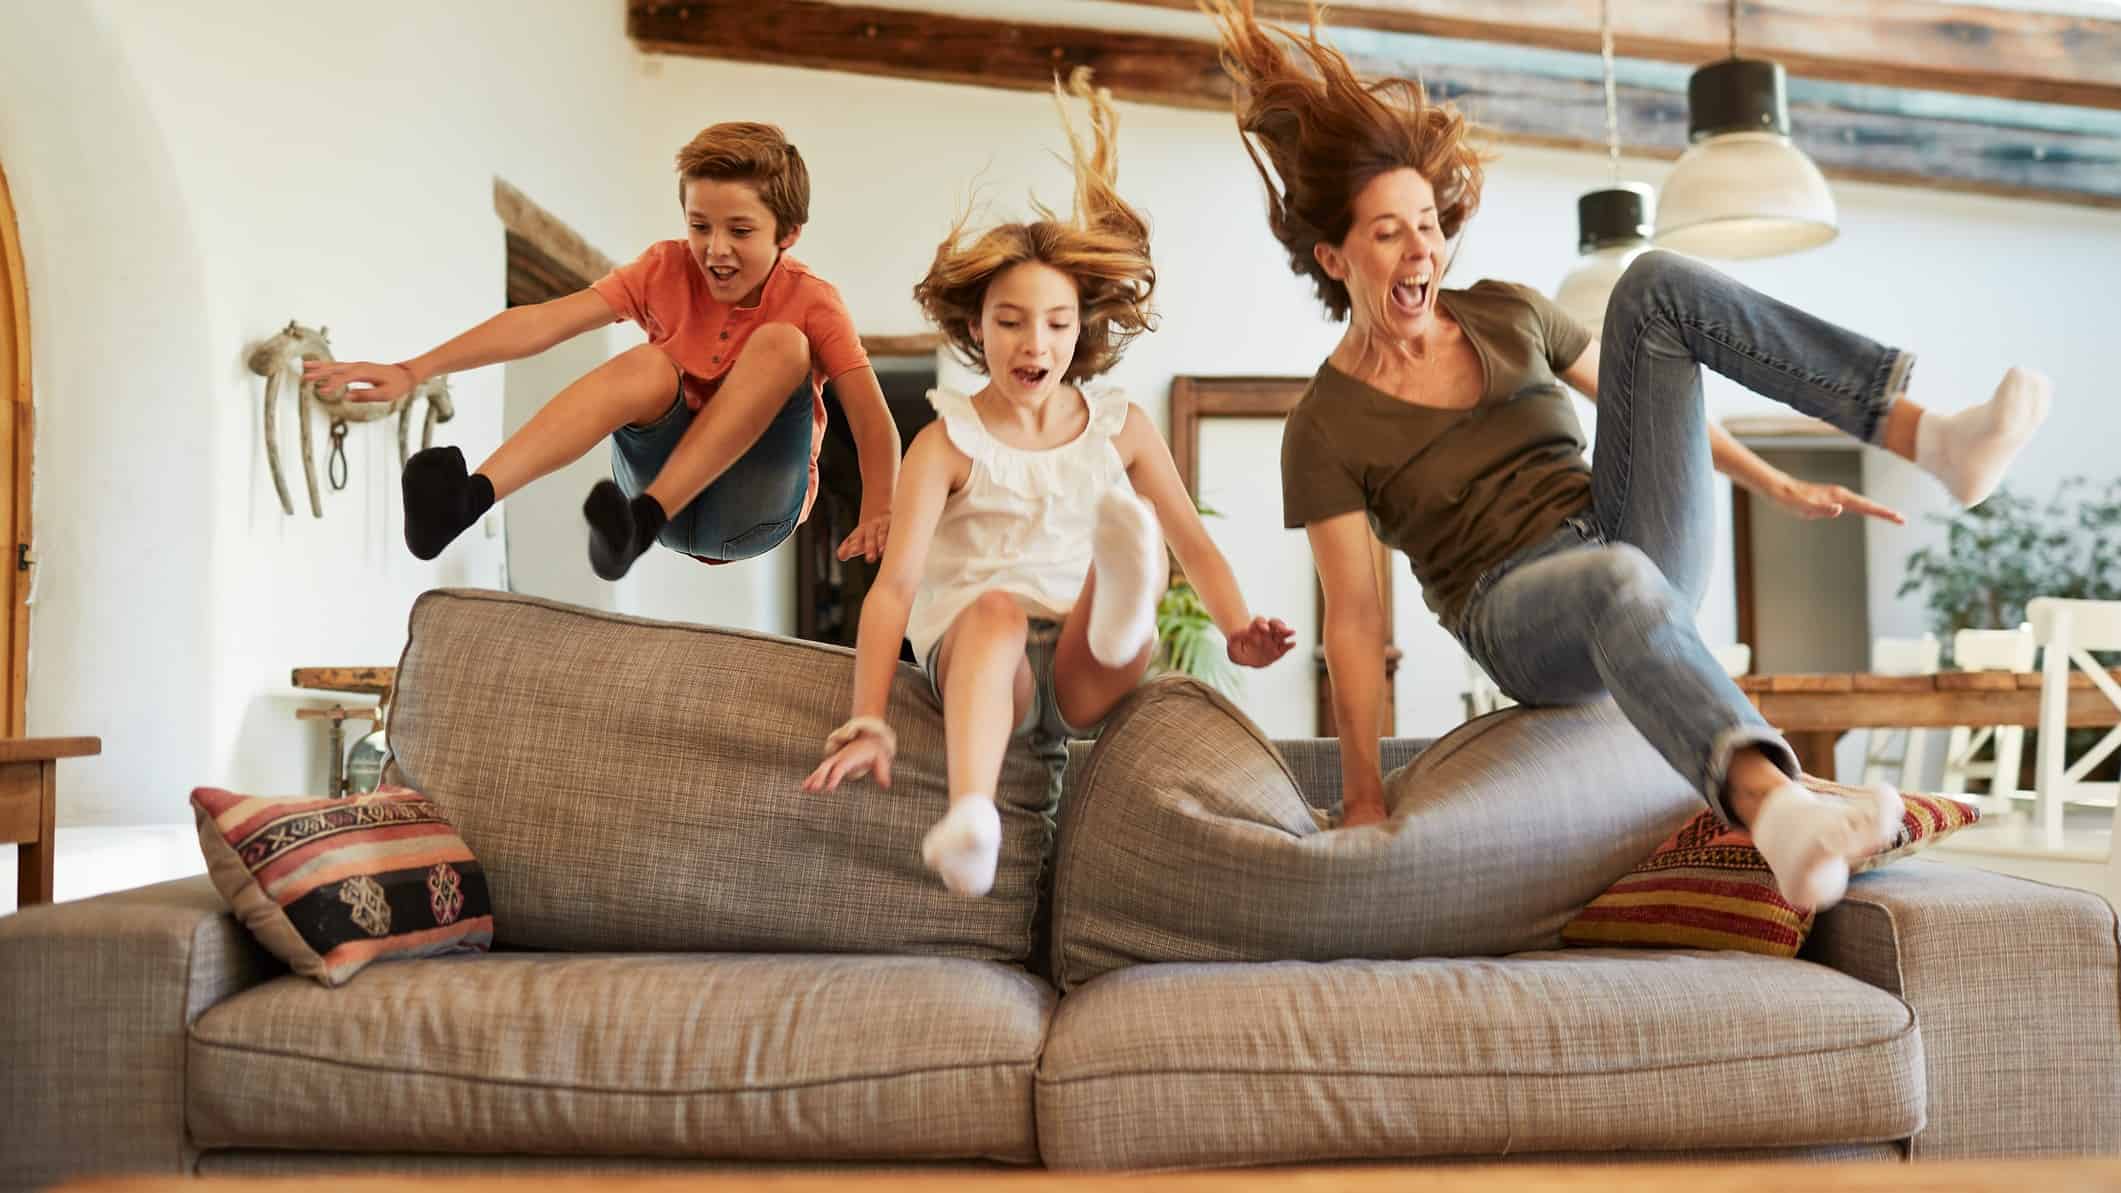 A woman and two children leap up and over a sofa.